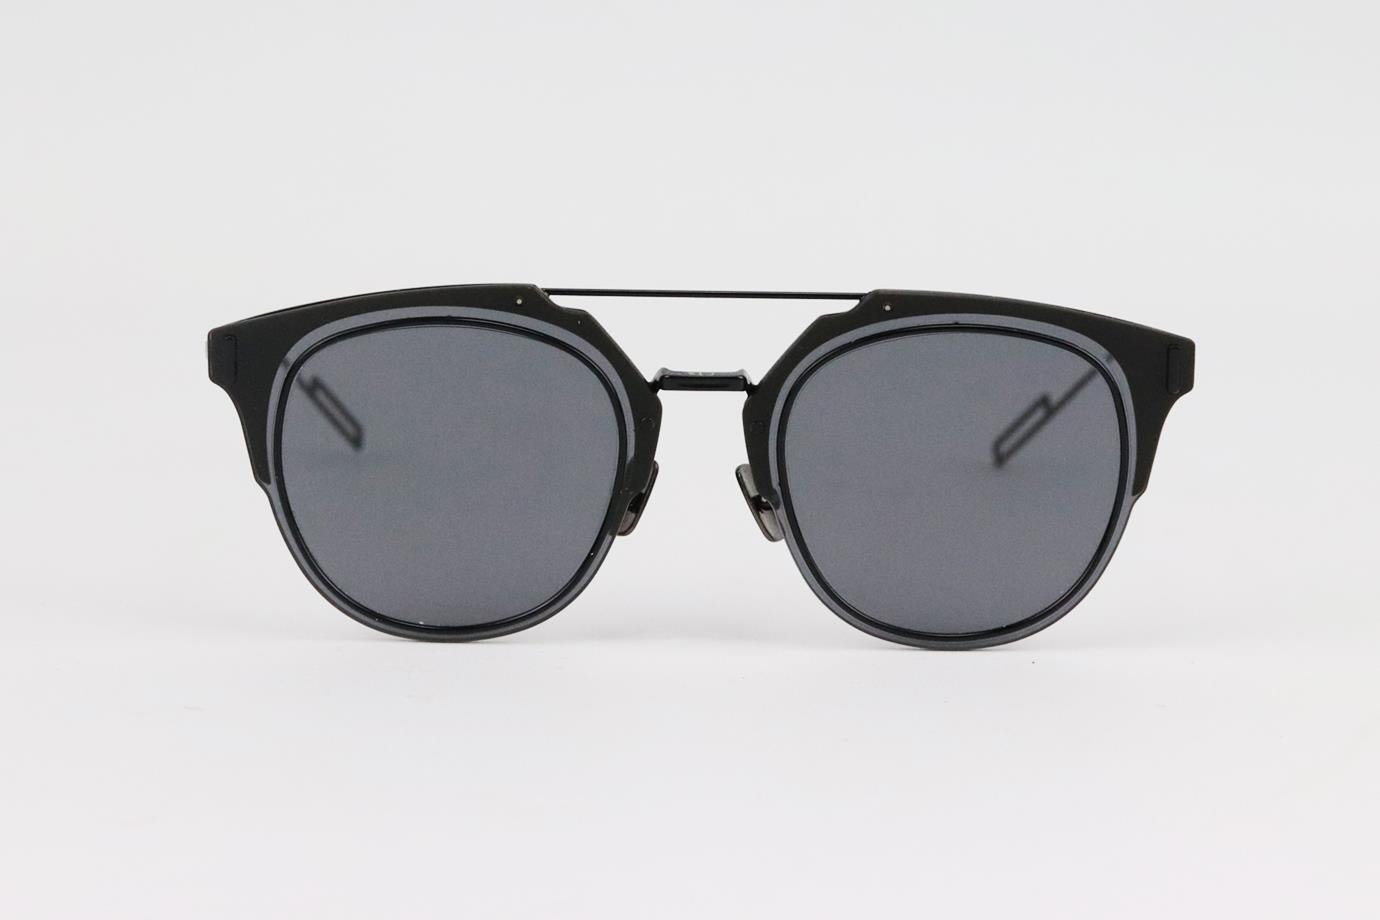 Christian Dior Homme d frame metal sunglasses. Black. Comes with case. Style Code: RDMO7BSPCJ. Lens size: 62 mm. Arm size: 150 mm. Bridge size: 12 mm. Very good condition - Very light scratches to lenses; see pictures. 
